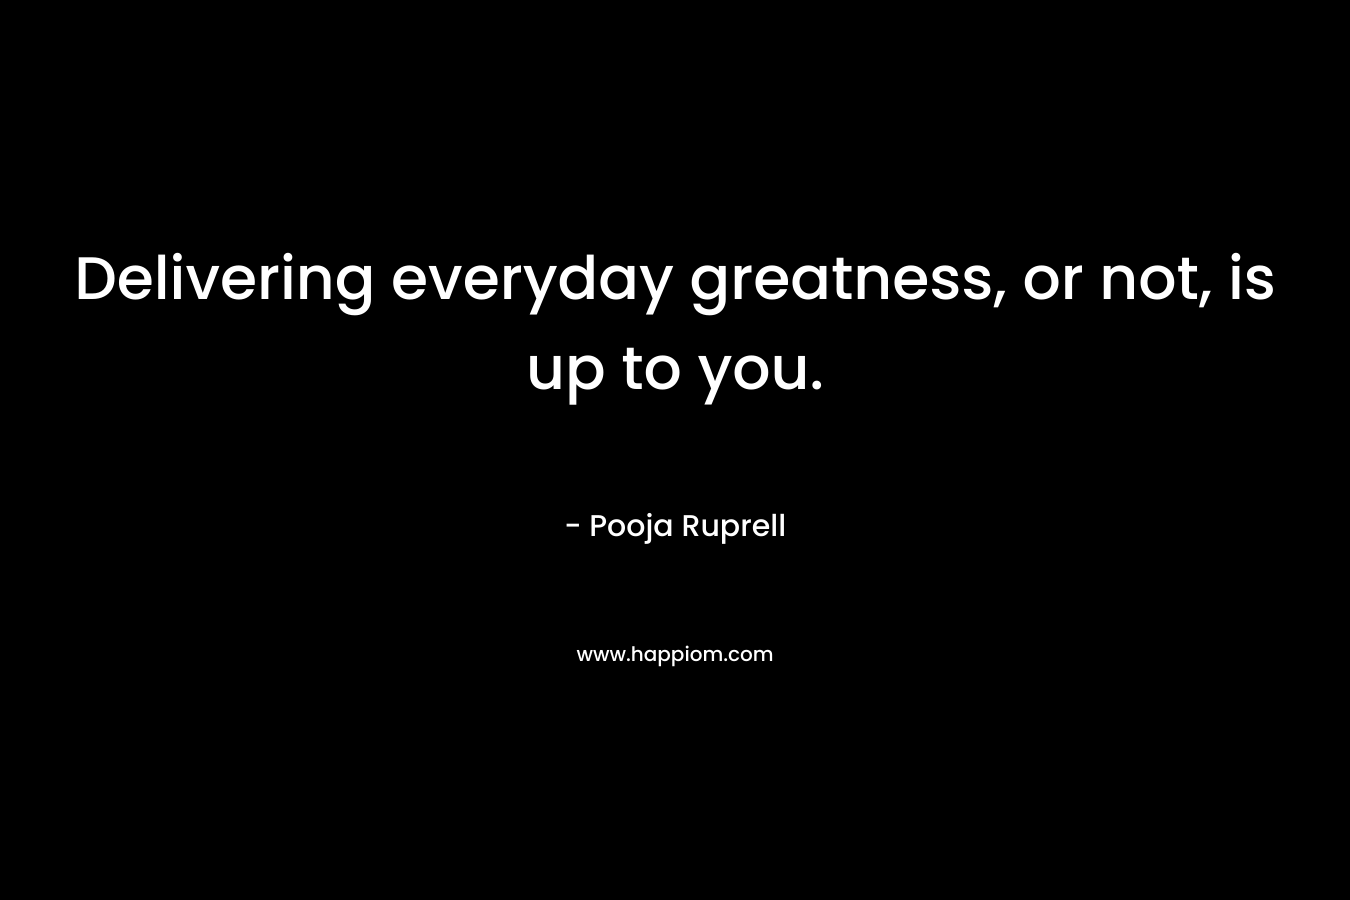 Delivering everyday greatness, or not, is up to you. – Pooja Ruprell